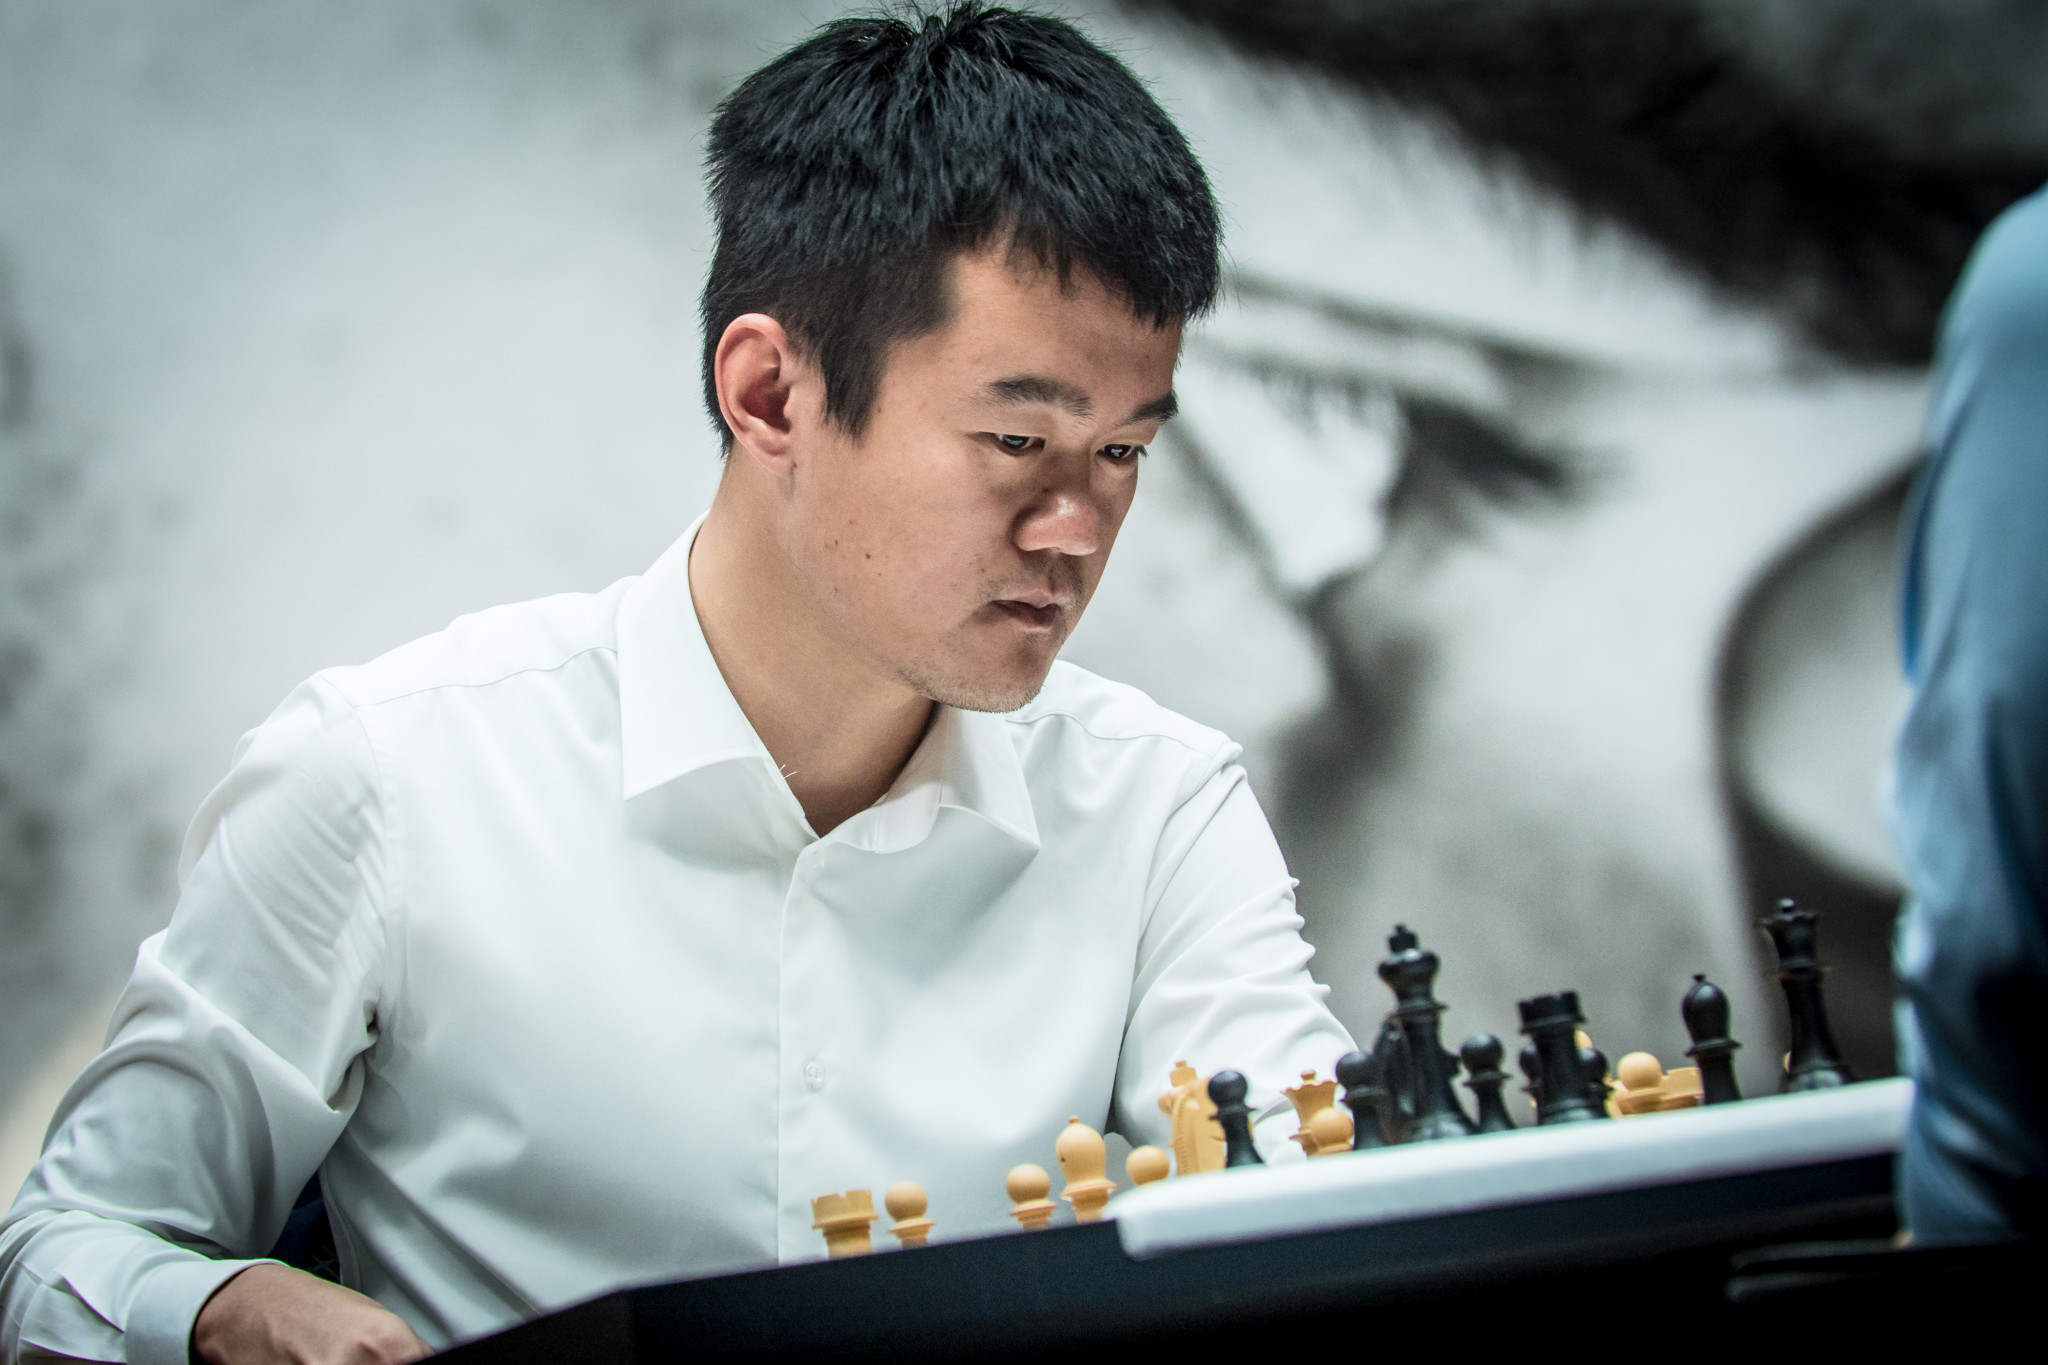 China's Ding Liren defended well to hold Russian neutral Ian Nepomniachtchi to a draw ©FIDE/Anna Shtourman